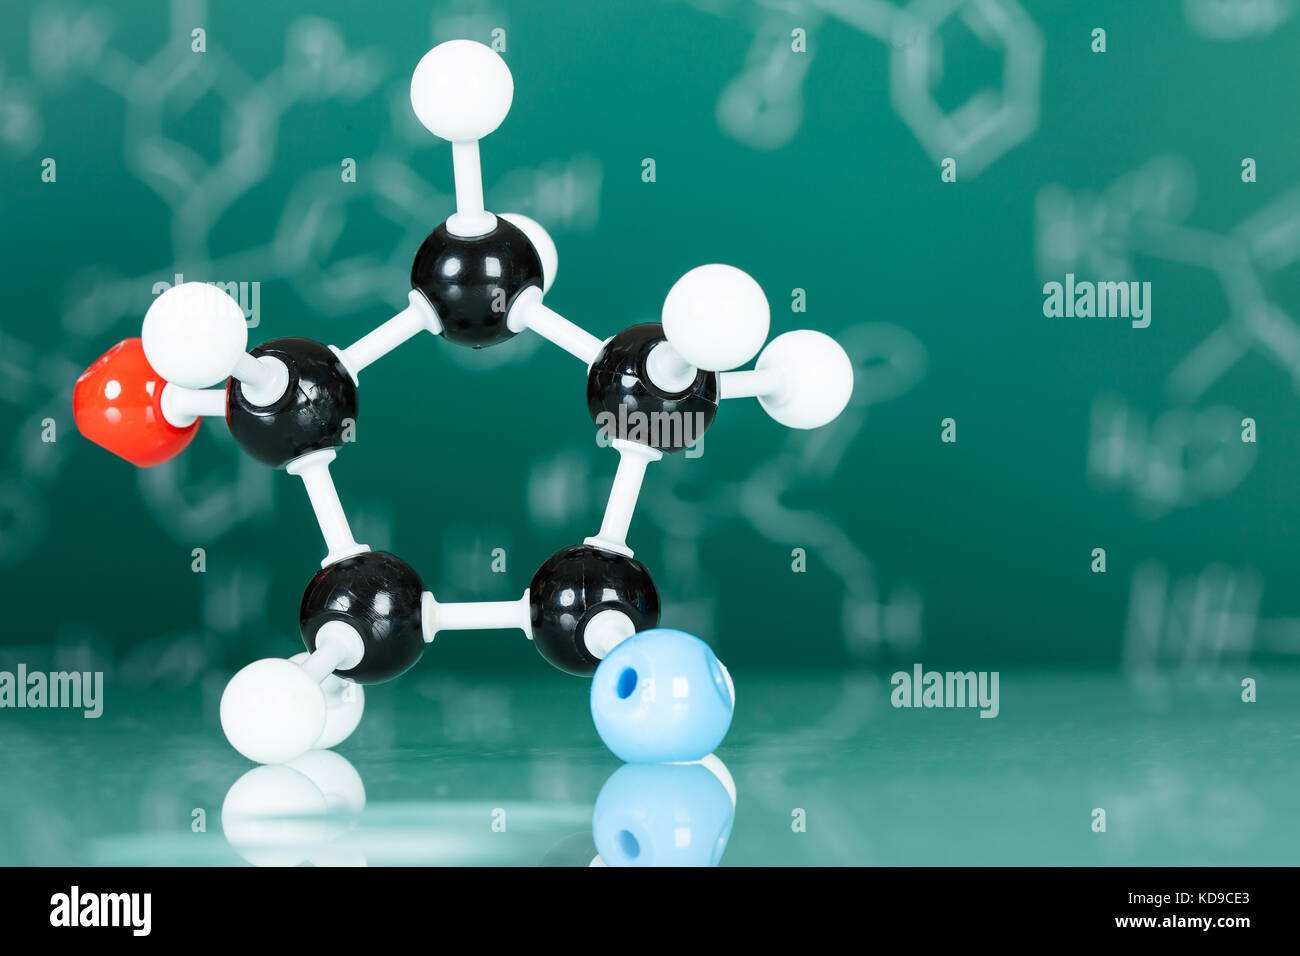 Model of molecular structure on green reflective background Stock Photo